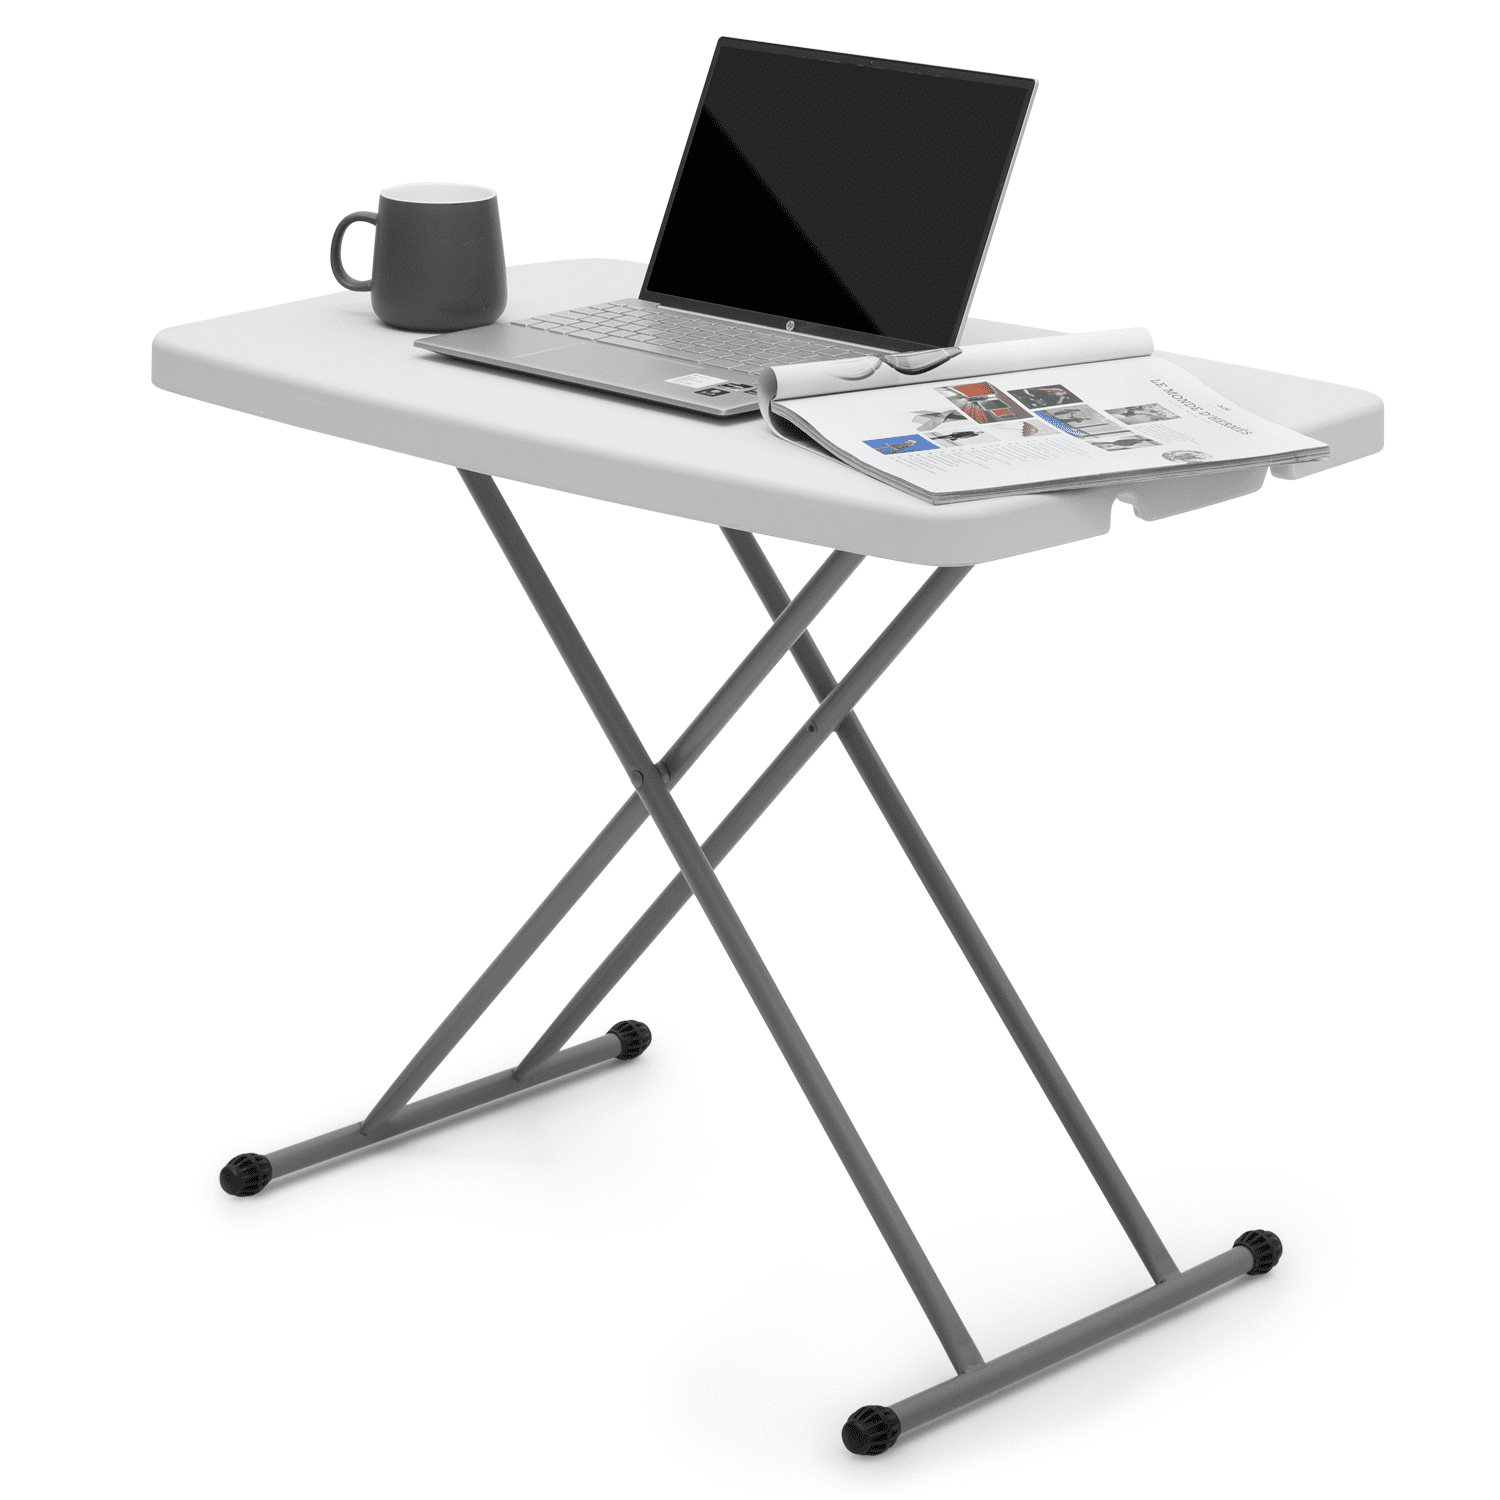 Unfolding Portable Folding Picnic Camping Desk Laptop Table Stand Computer Notebook Desk Hold up to 15 kg approx Size:80x60x70CM Fold 80x60x5CM 